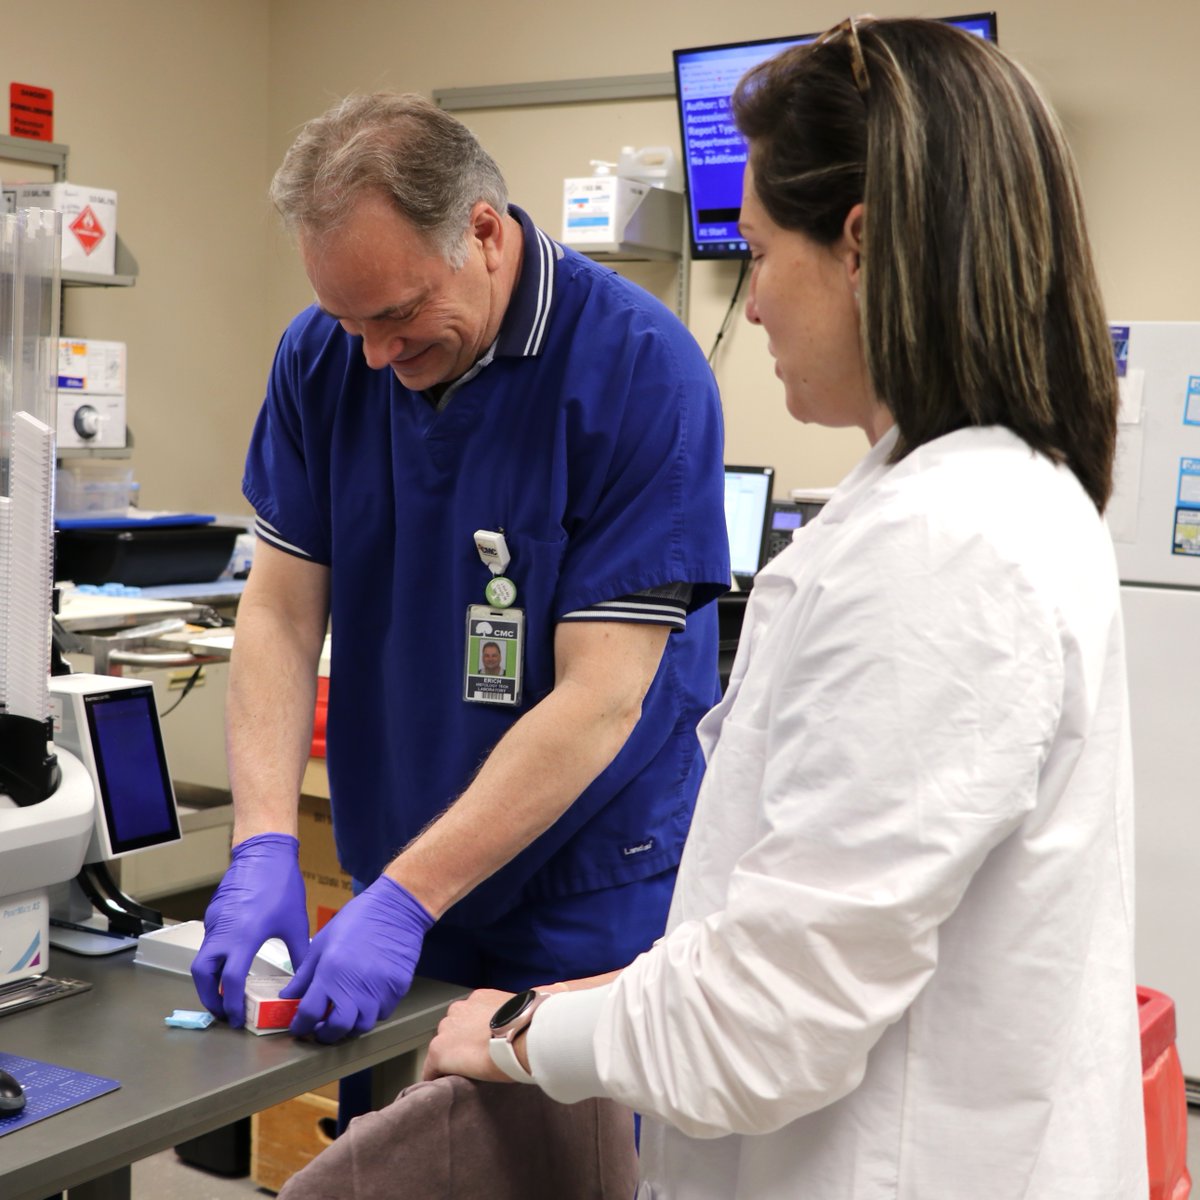 Histotechs, Erich and Mandy, work closely with our pathology team around the clock to help your physicians accurately diagnose the diseases and conditions that could be affecting you. #LabWeek #ThankYou #LaboratoryProfessionals